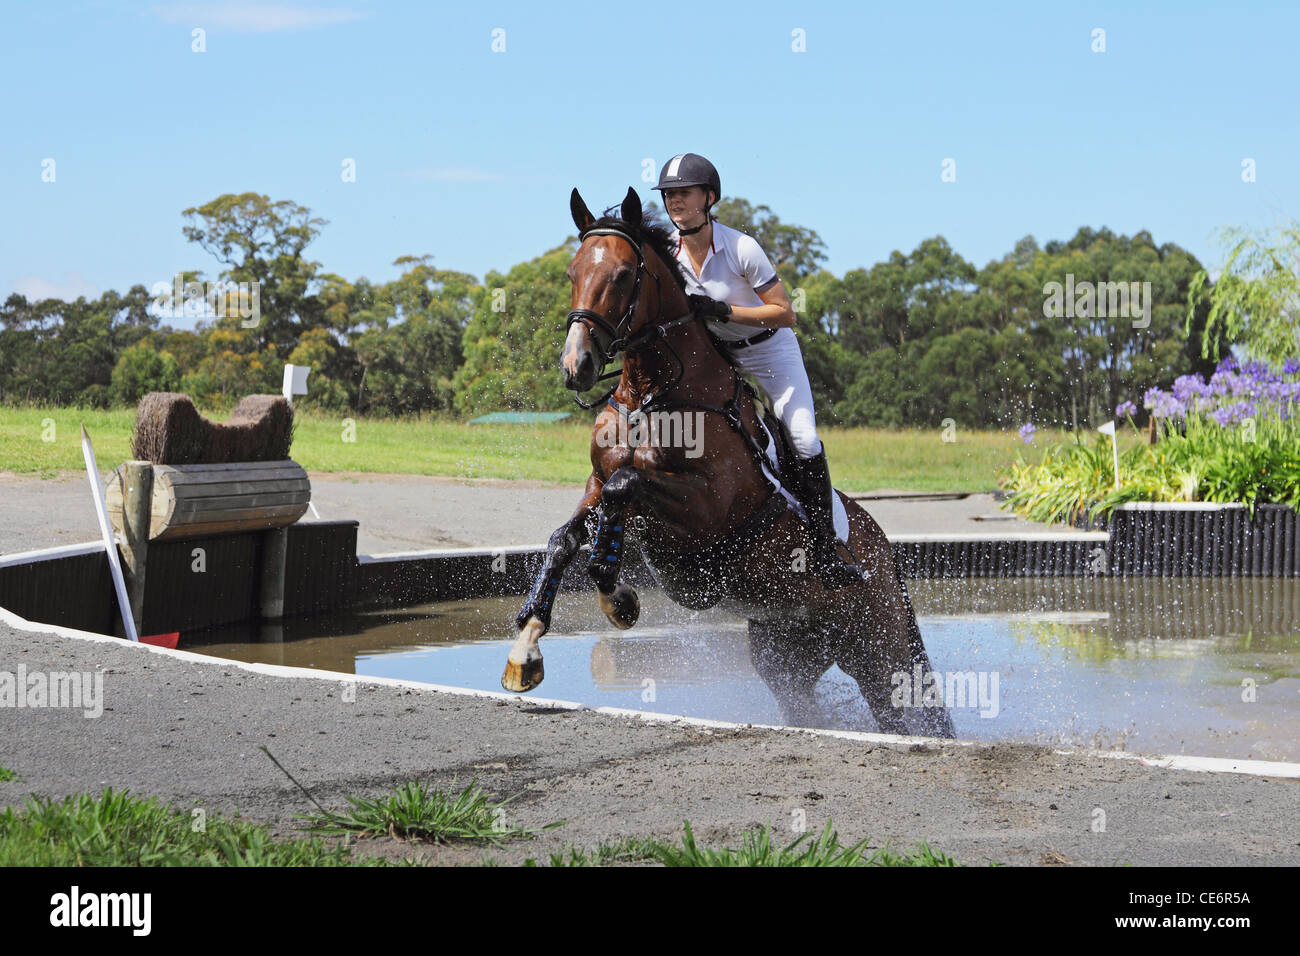 Horse Rider Crossing Water in Equestrian Event Stock Photo